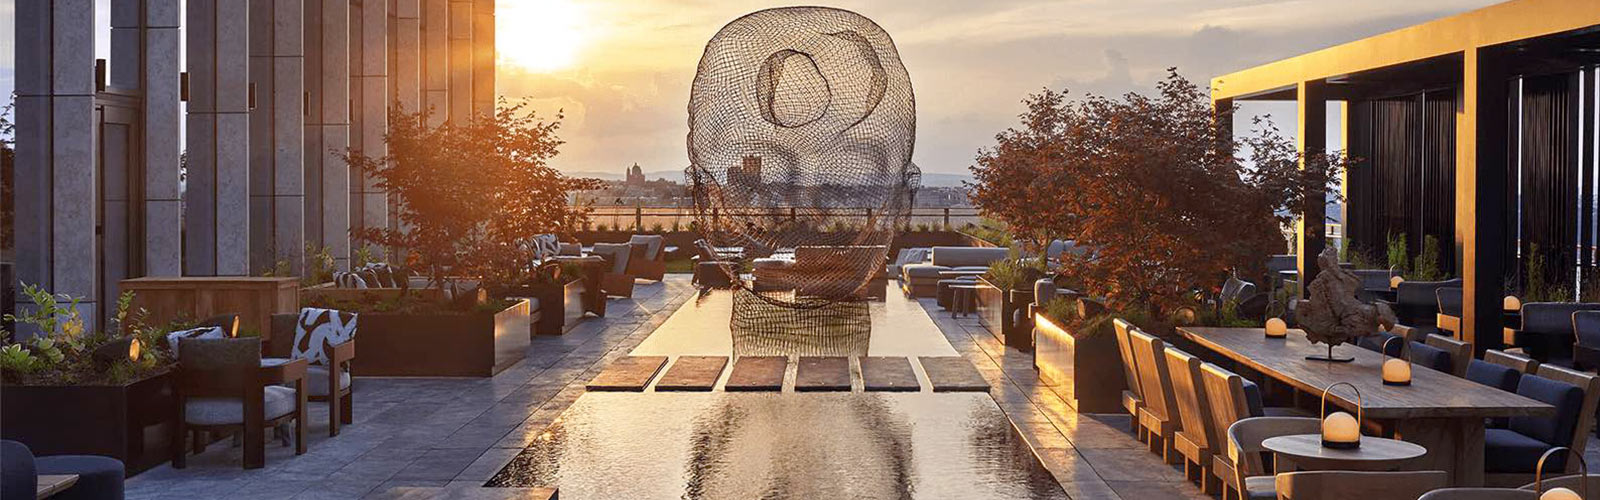 Dazzling view of the sunset from the balcony of the Equinox Hotel with multiple cozy seating areas and a modern wire sculpture over a water feature.